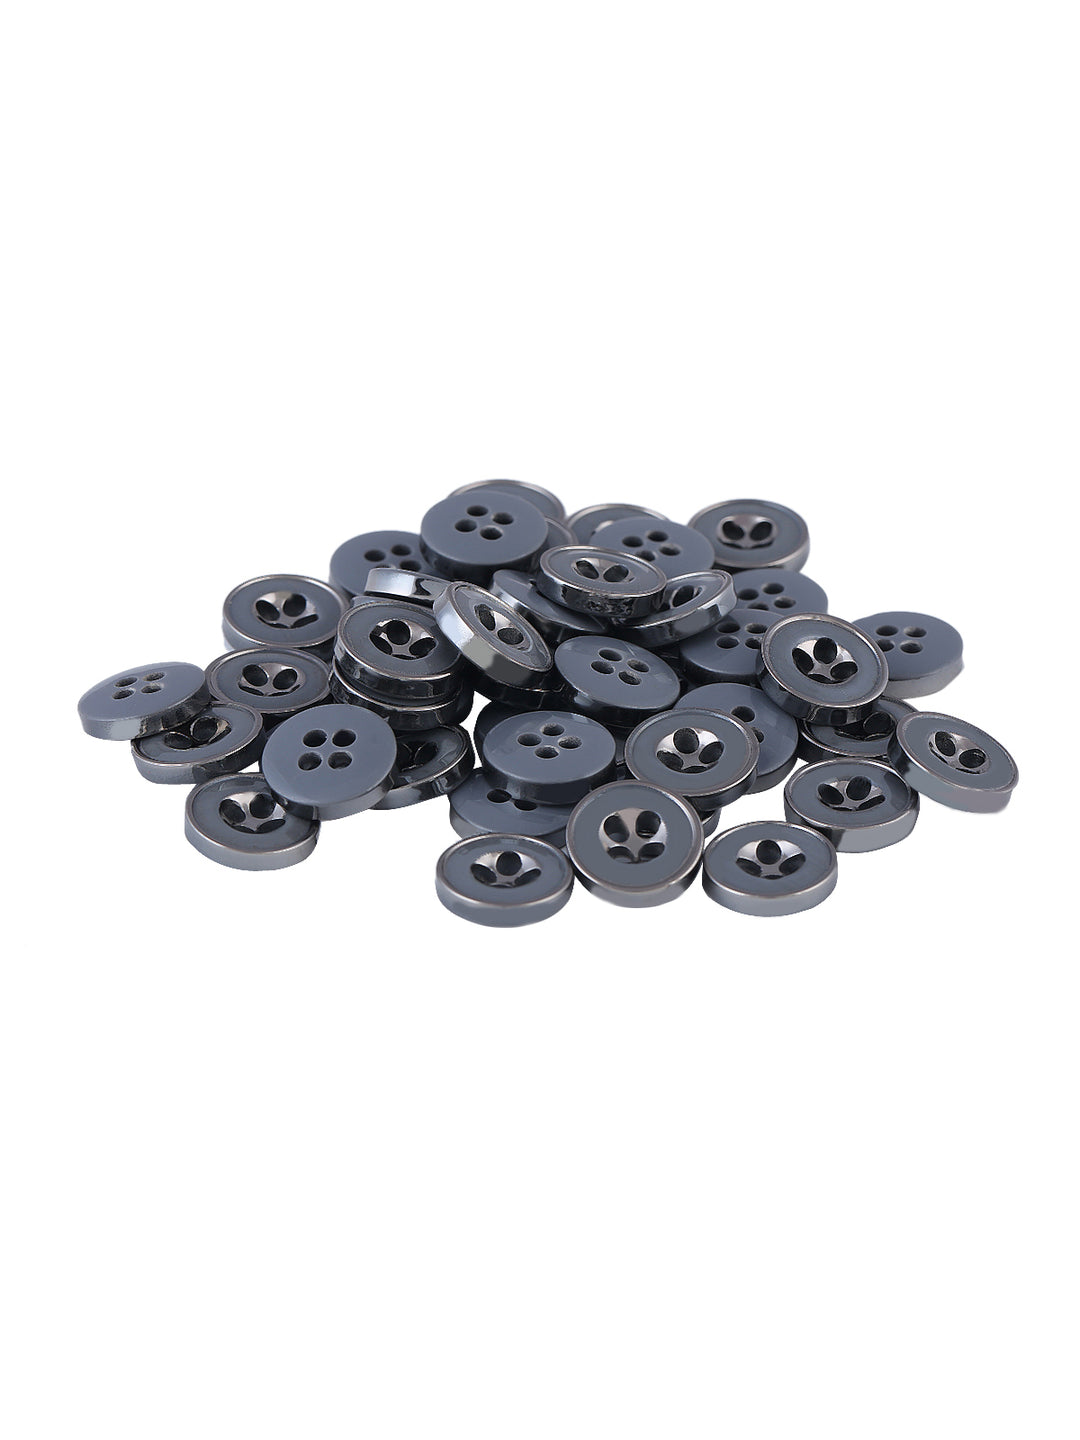 Small Round Shape 10mm Grey Hollow Shirt Button